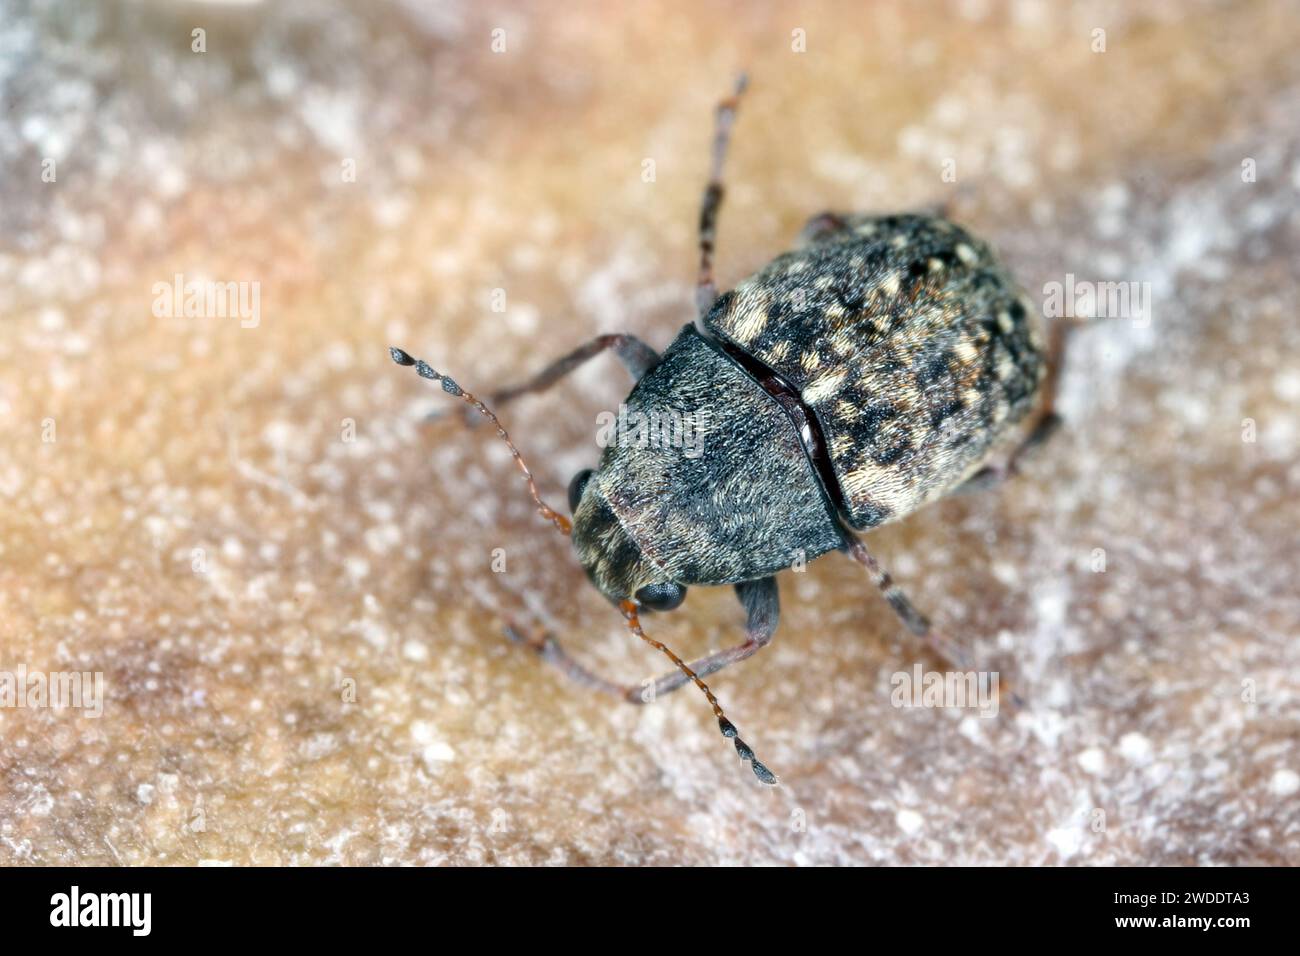 Araecerus fasciculatus, the coffee bean weevil, is a species of beetle (Coleoptera) belonging to the family Anthribidae. Causes significant damage to Stock Photo